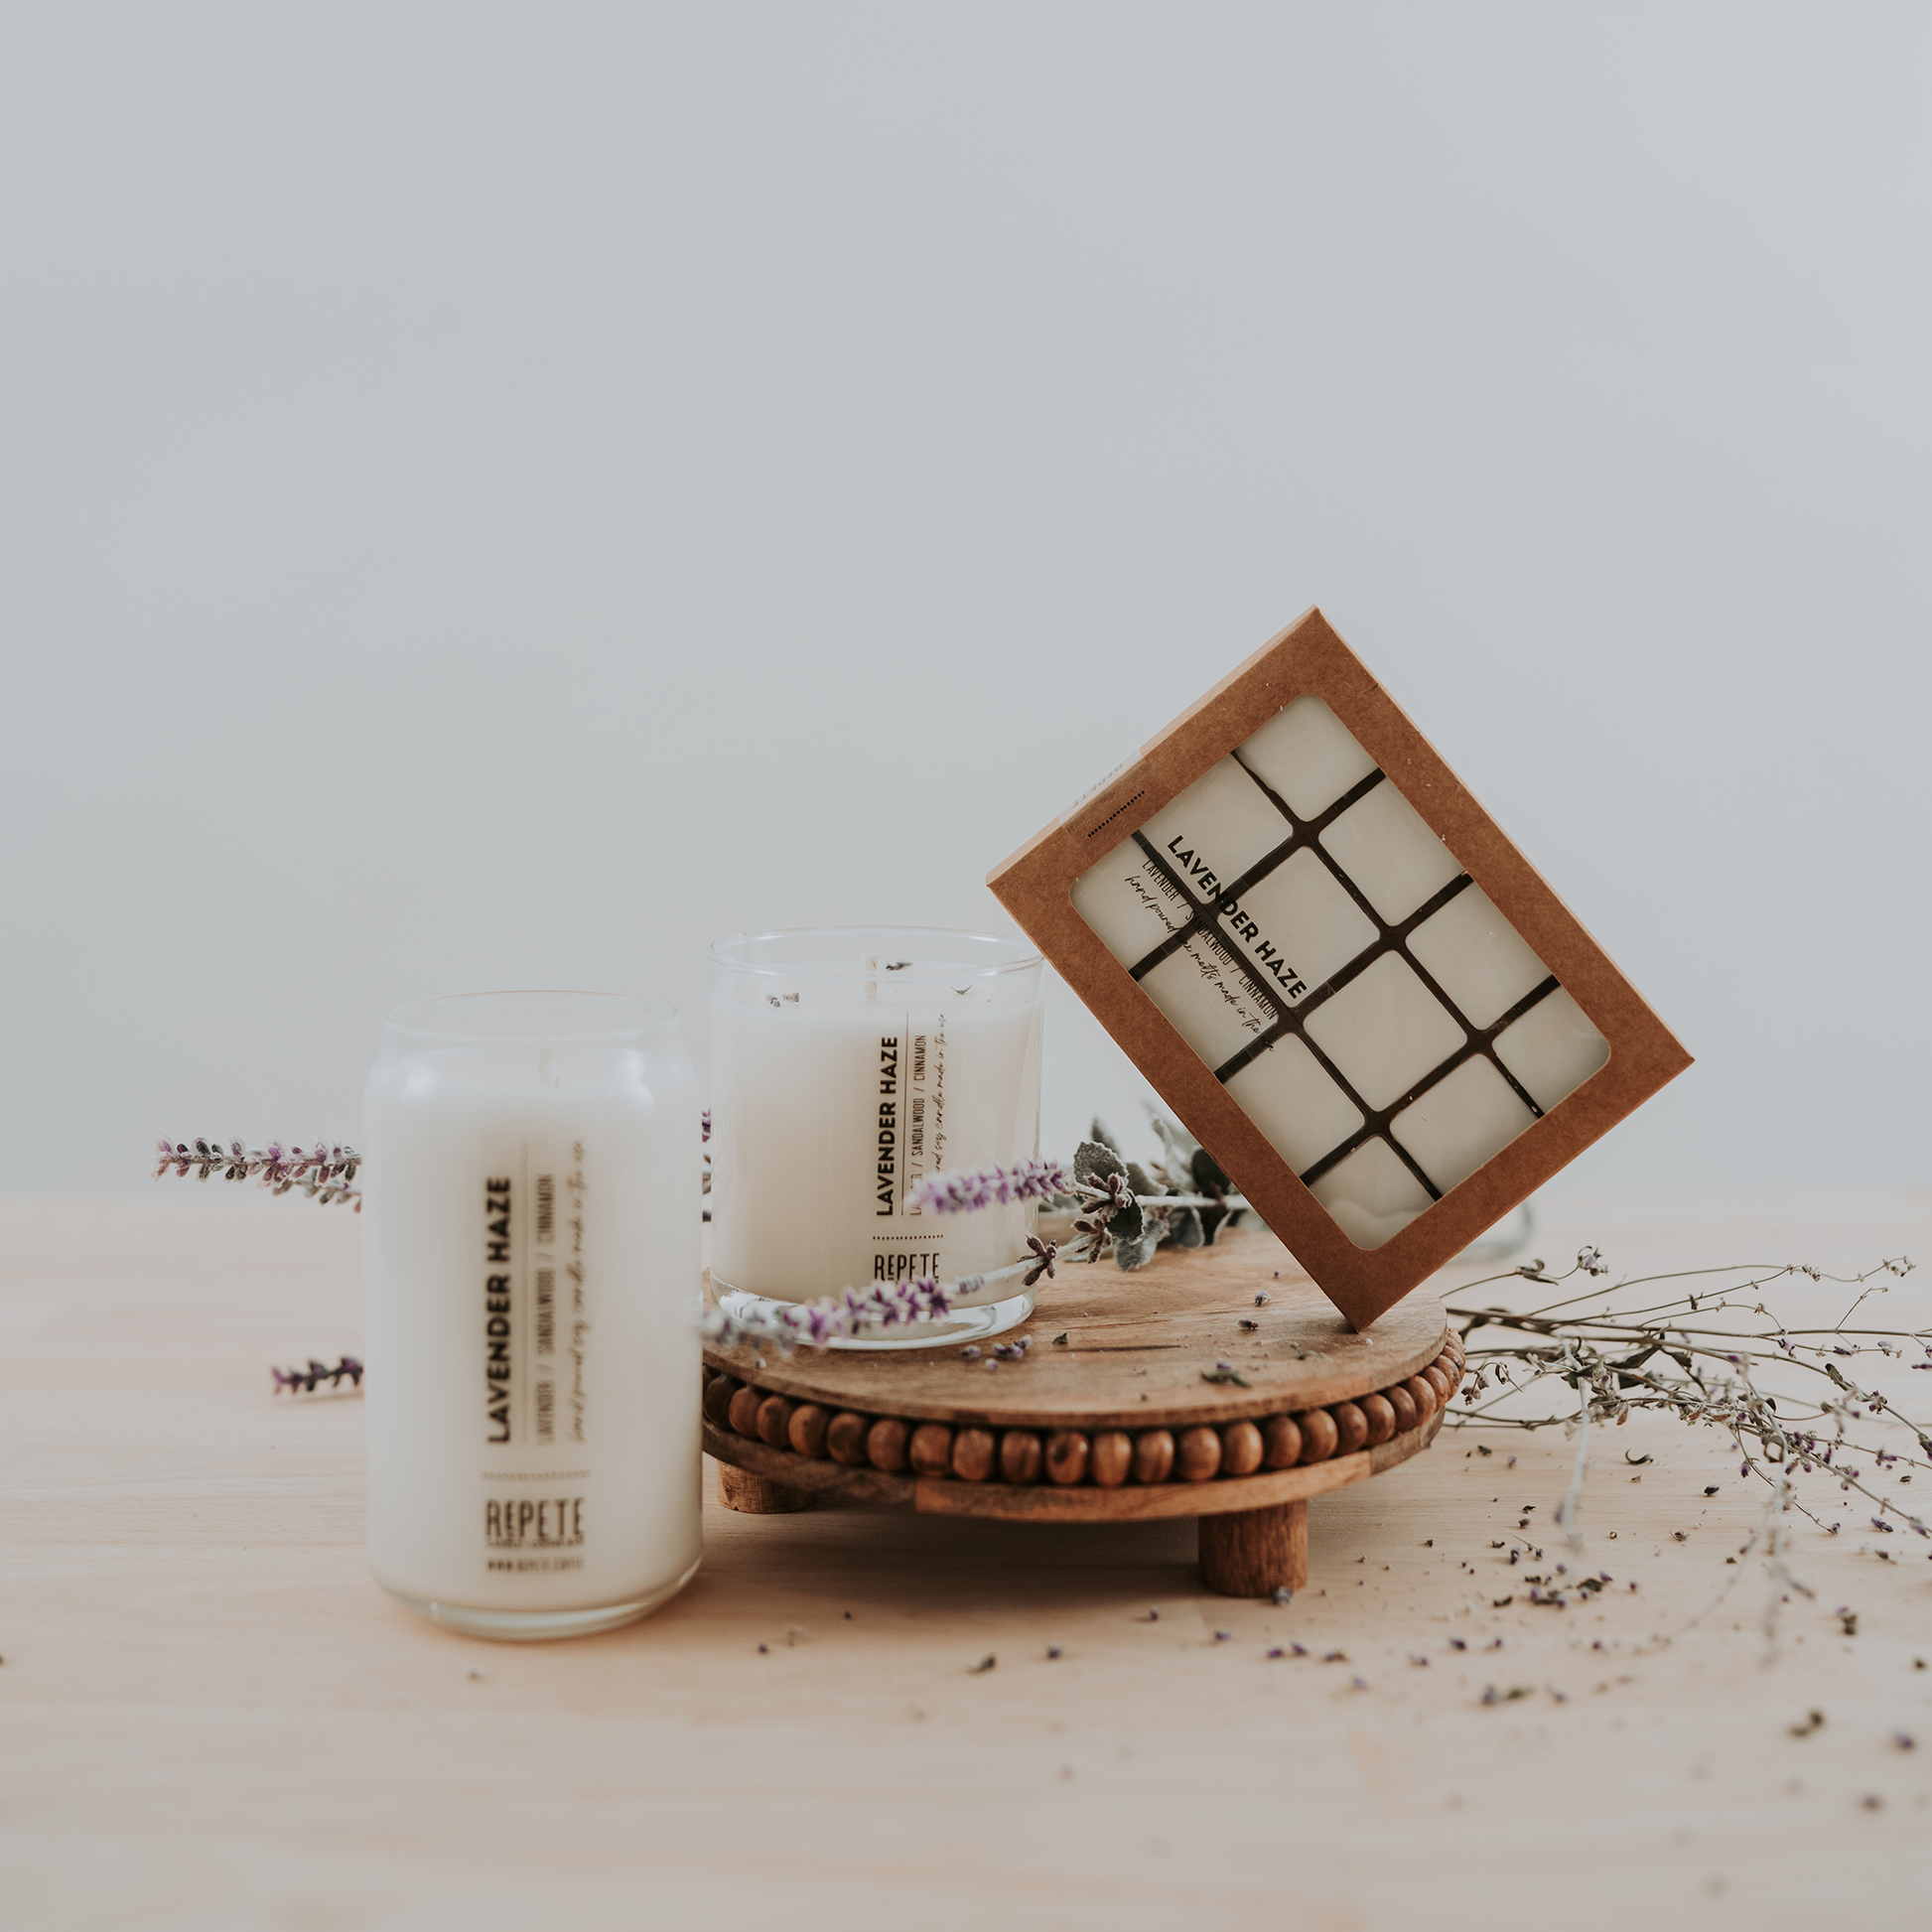 Lavender Haze scented products from Repete Candle and Coffee Bar